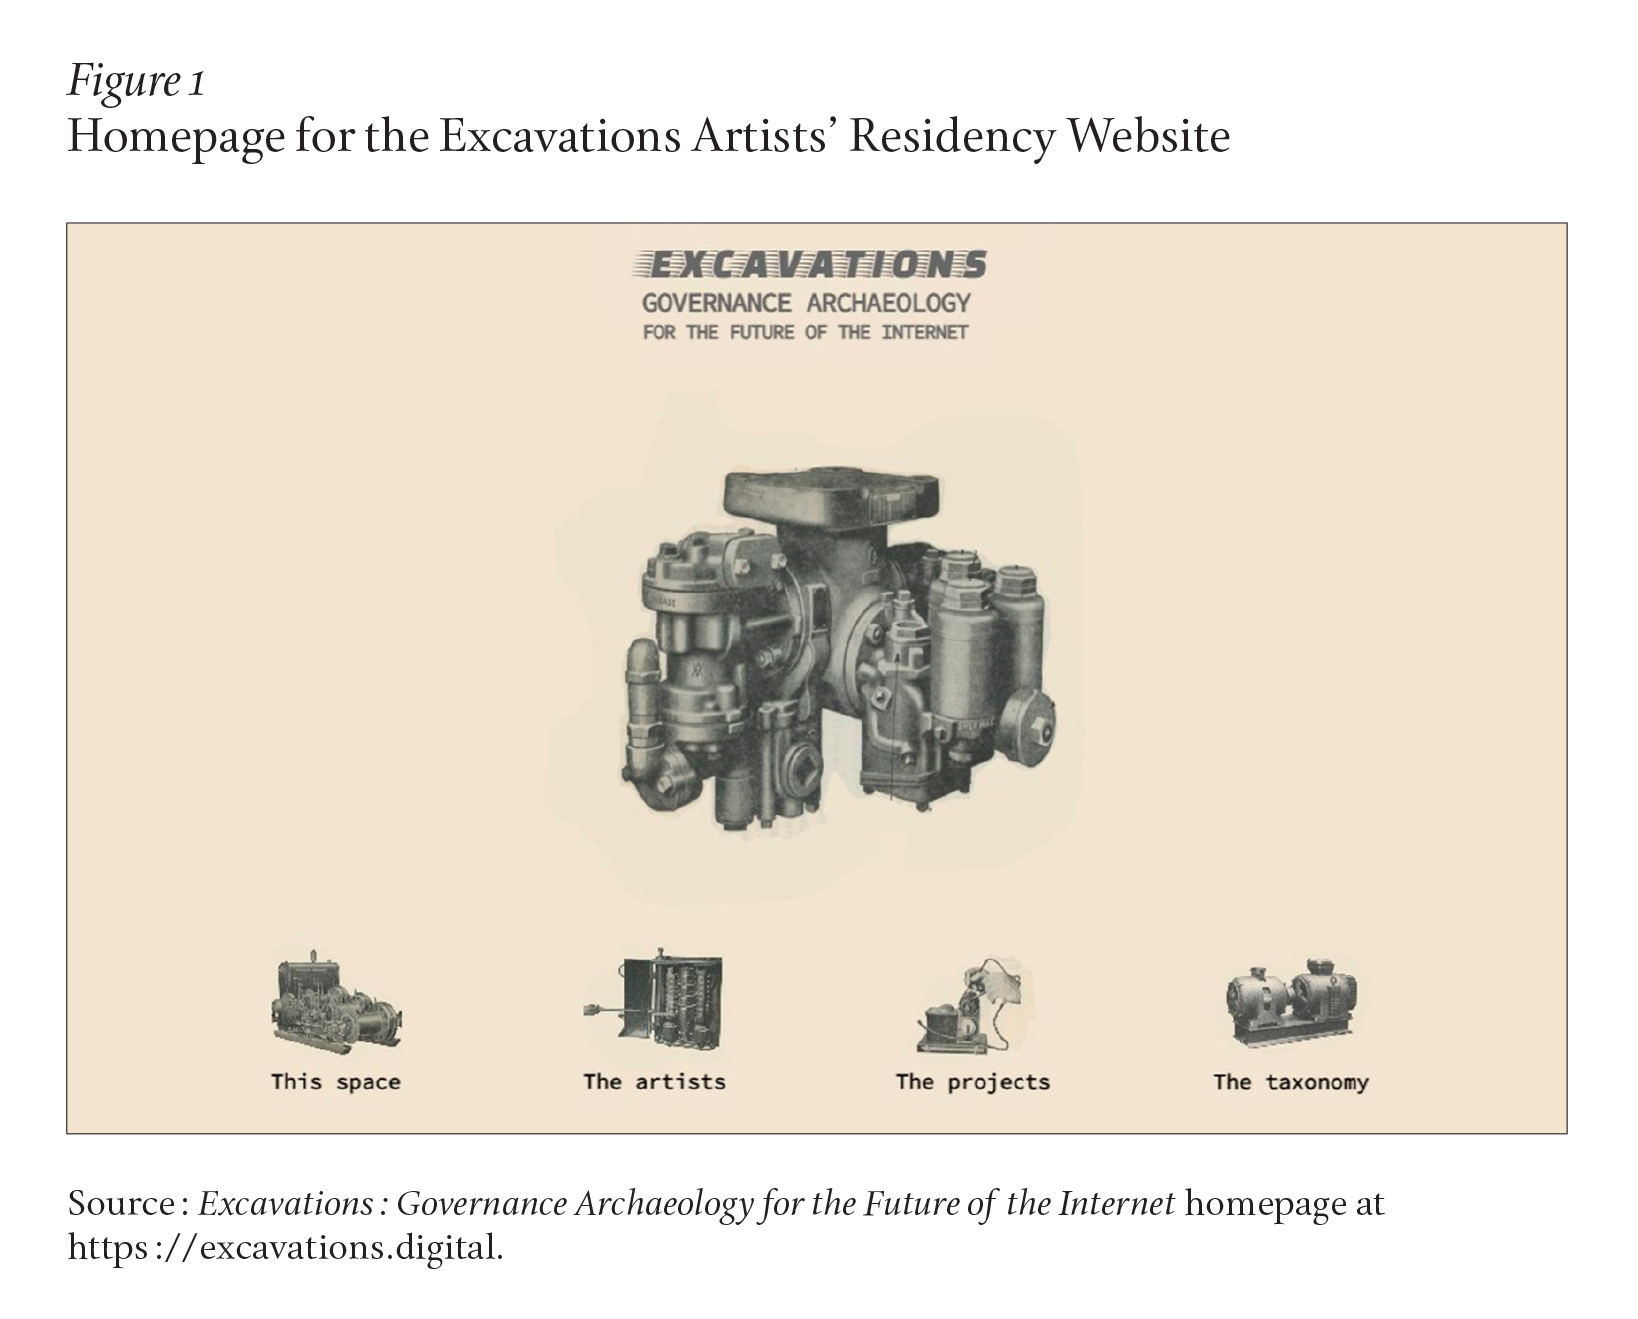 A screenshot of the landing page for excavations.digital, with menus labeled This space, The Artists, The projects, and The taxonomy. The site is titled Excavations: Governance Archaeology for the Future of the Internet, and the central image is an engine with multiple pistons.